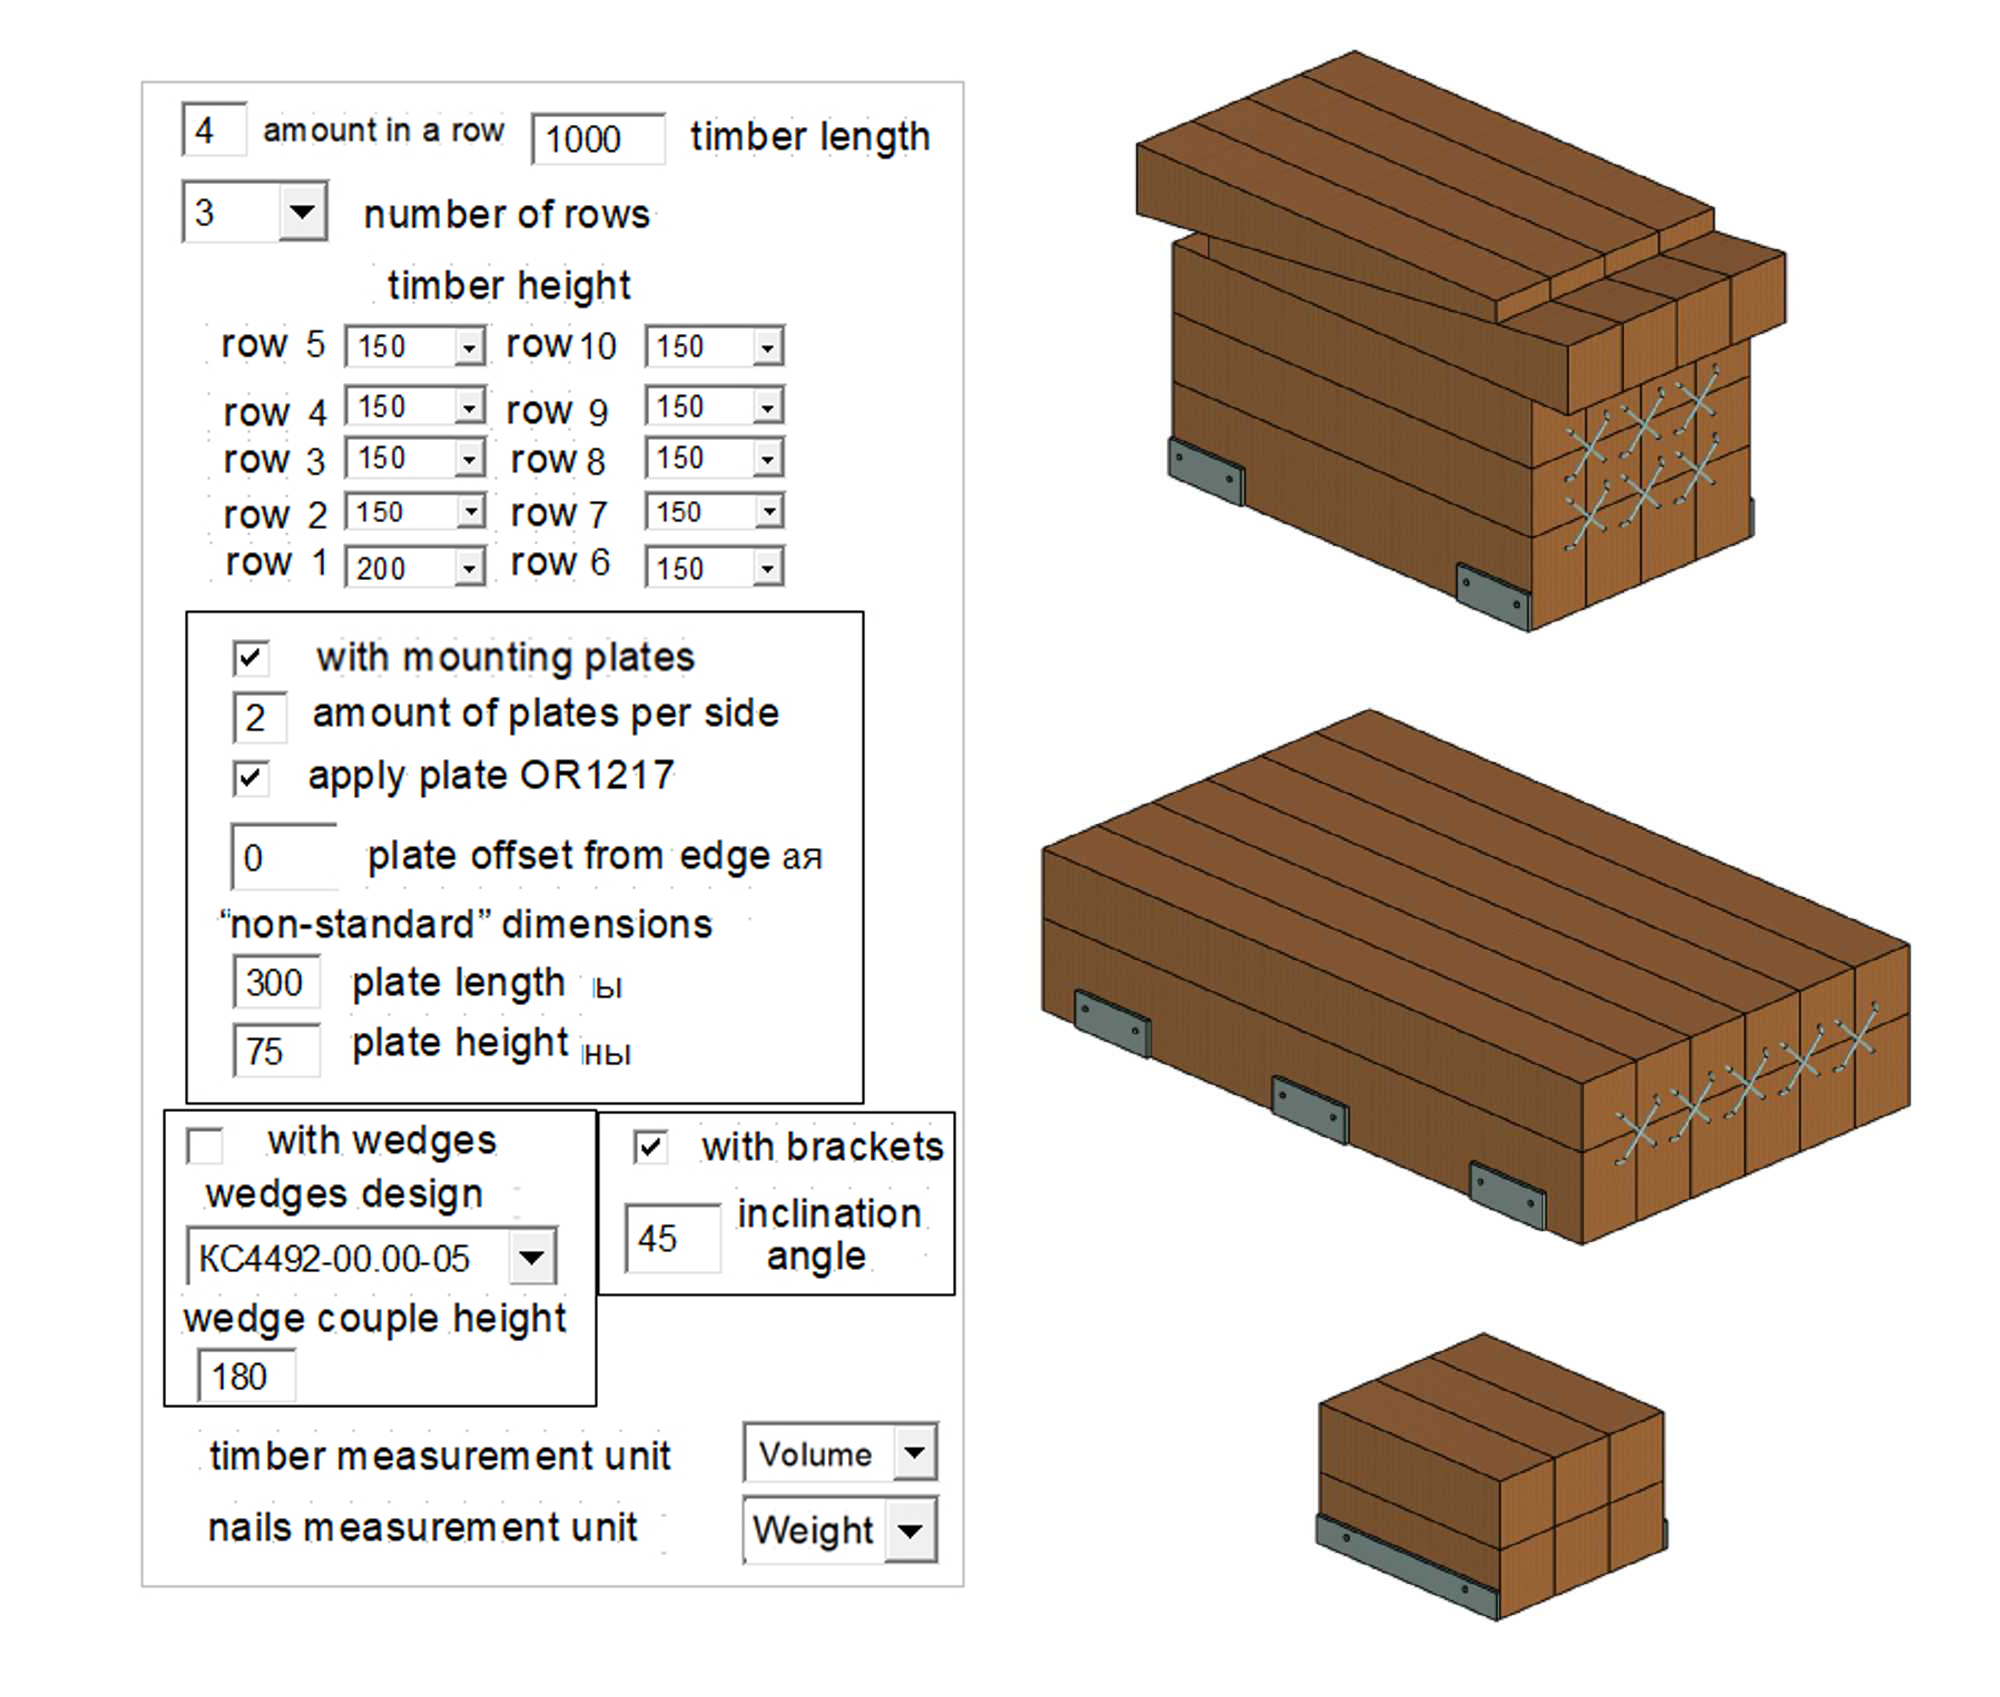 Figure 2 - Parameters dialog and configuration options for the timber pad model